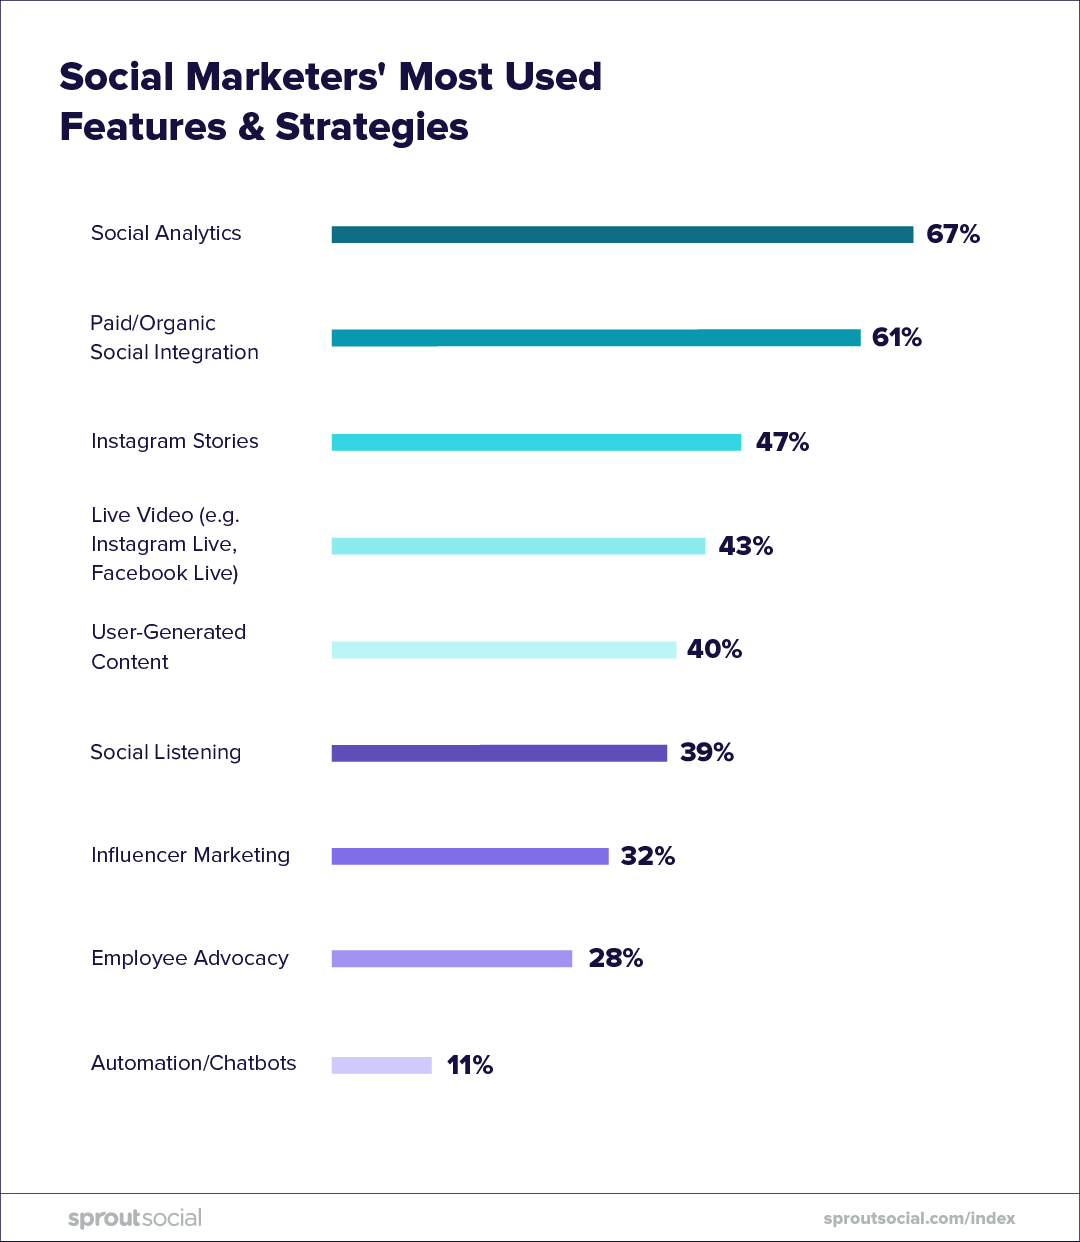 social marketer's most used features & strategies